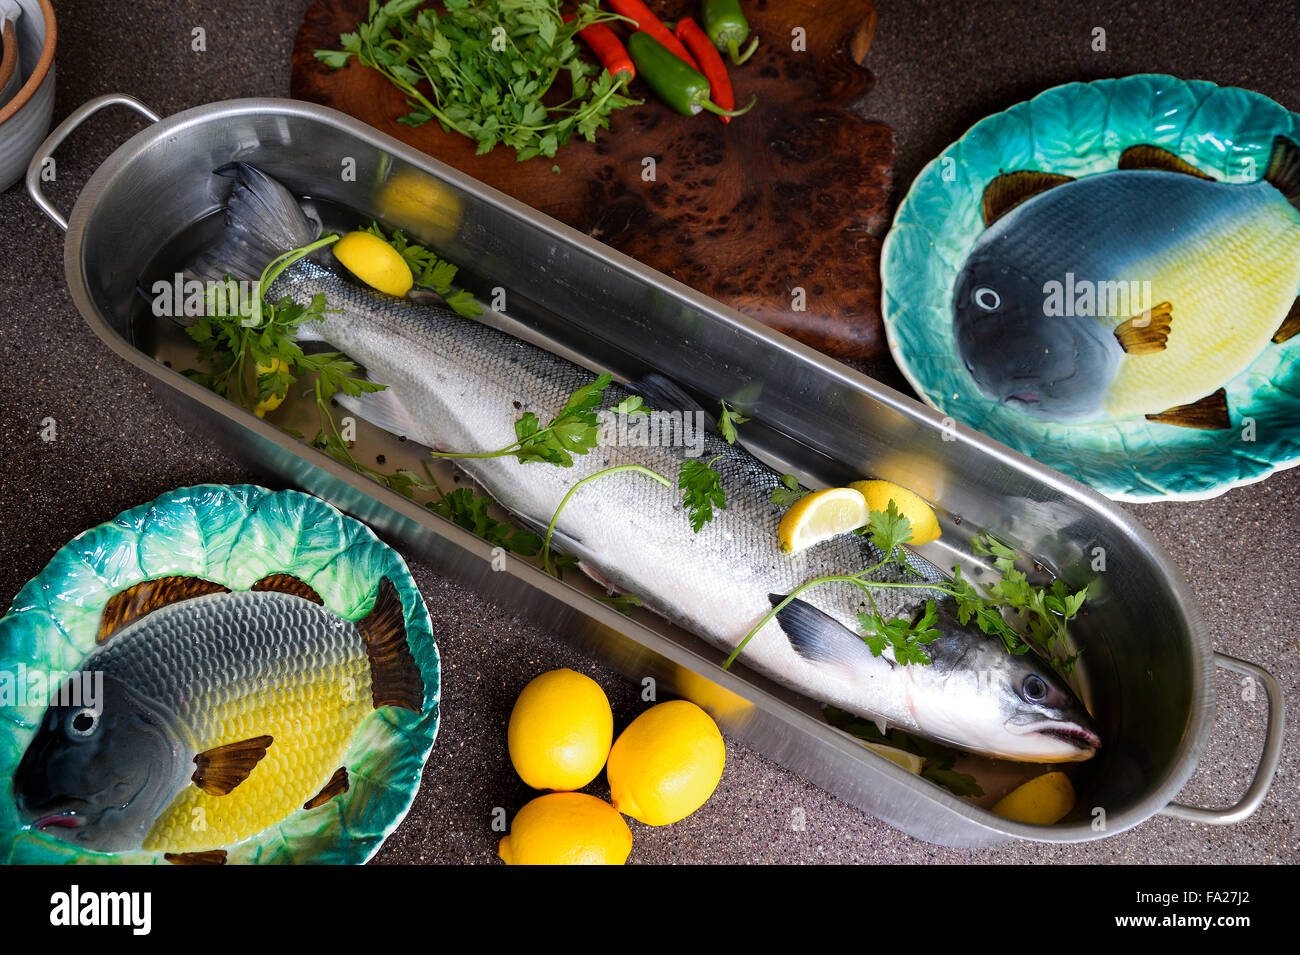 A whole fresh salmon prepared and ready to be cooked Stock Photo